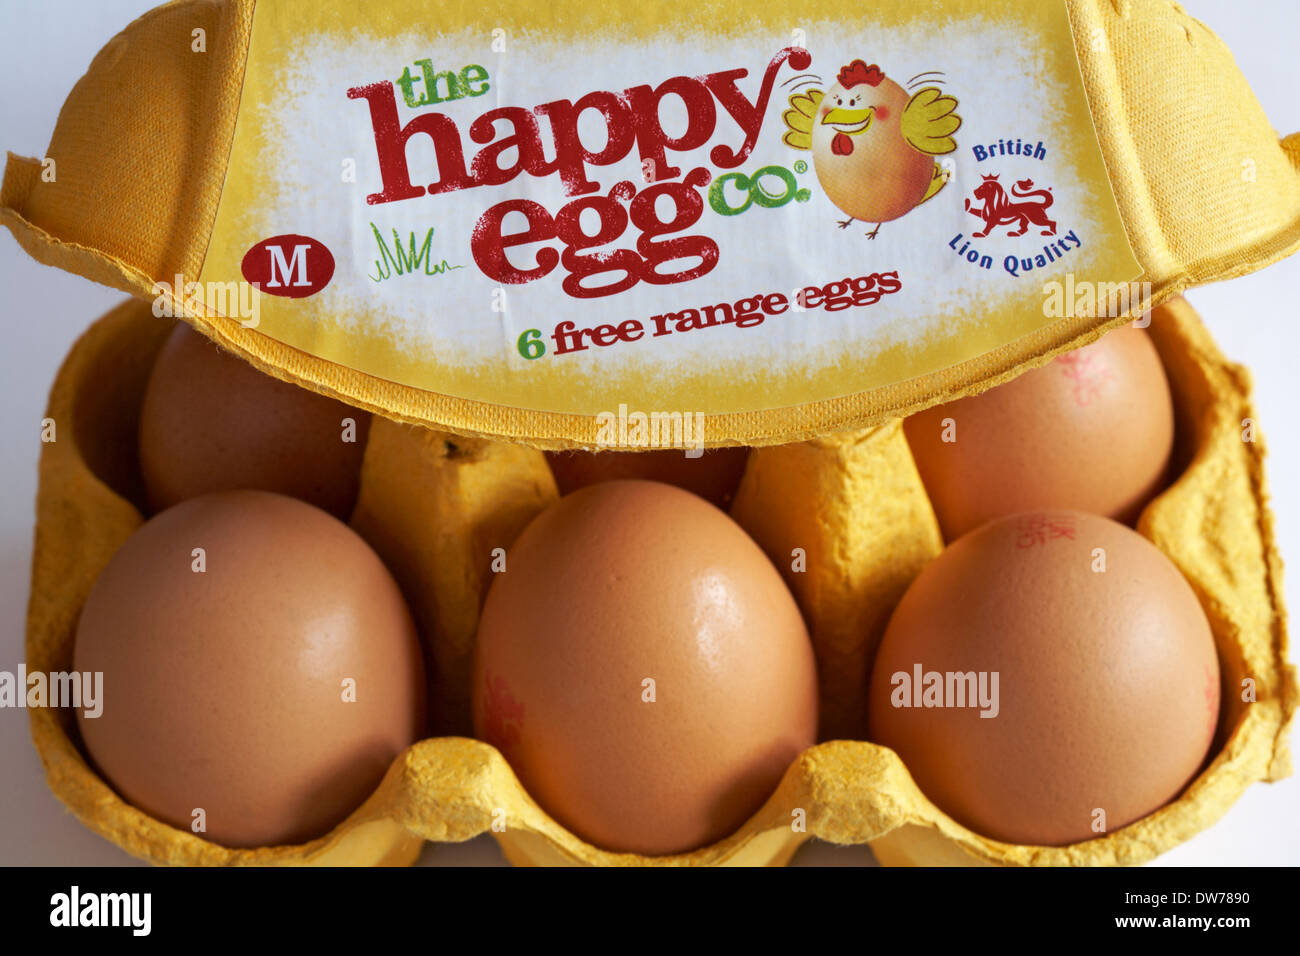 carton of the happy egg co 6 free range eggs British Lion quality M with lid open to show contents Stock Photo